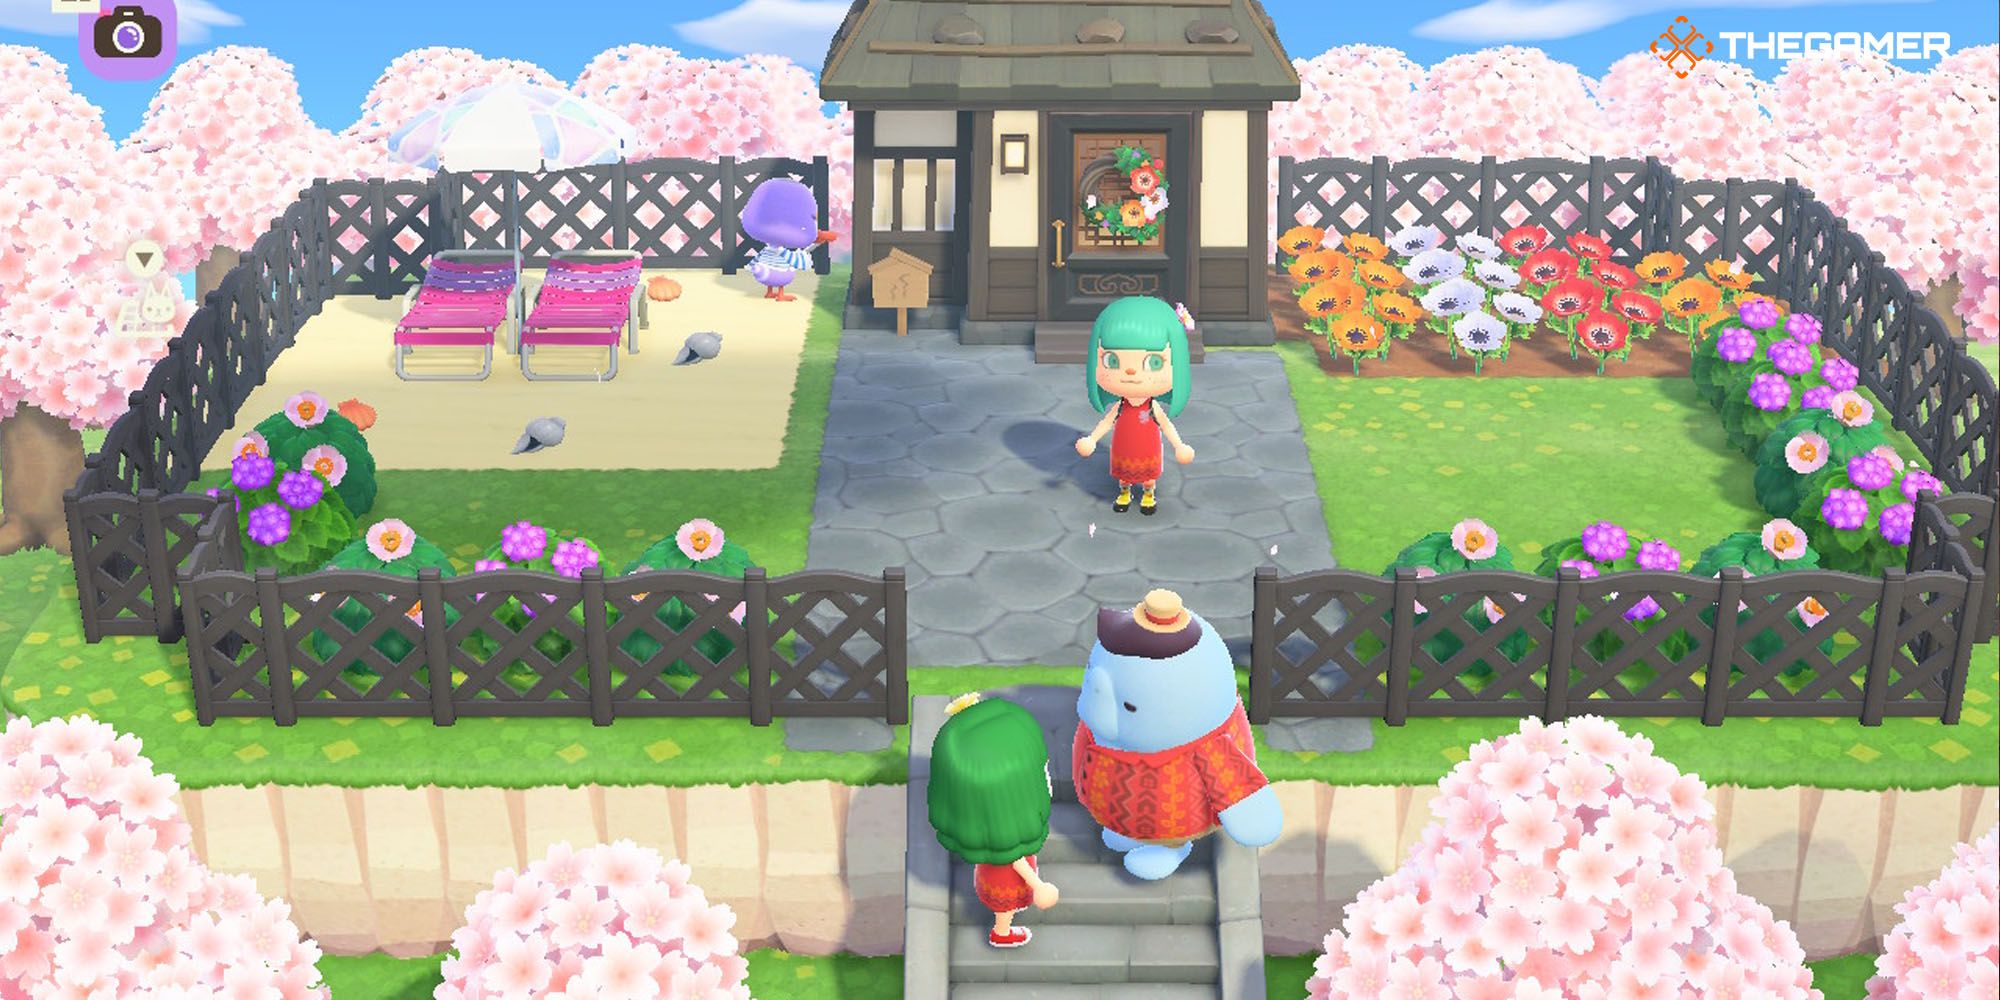 https://static1.thegamerimages.com/wordpress/wp-content/uploads/2021/11/Animal-Crossing-Happy-Home-Paradise-visiting-another-players-vacation-home.jpg